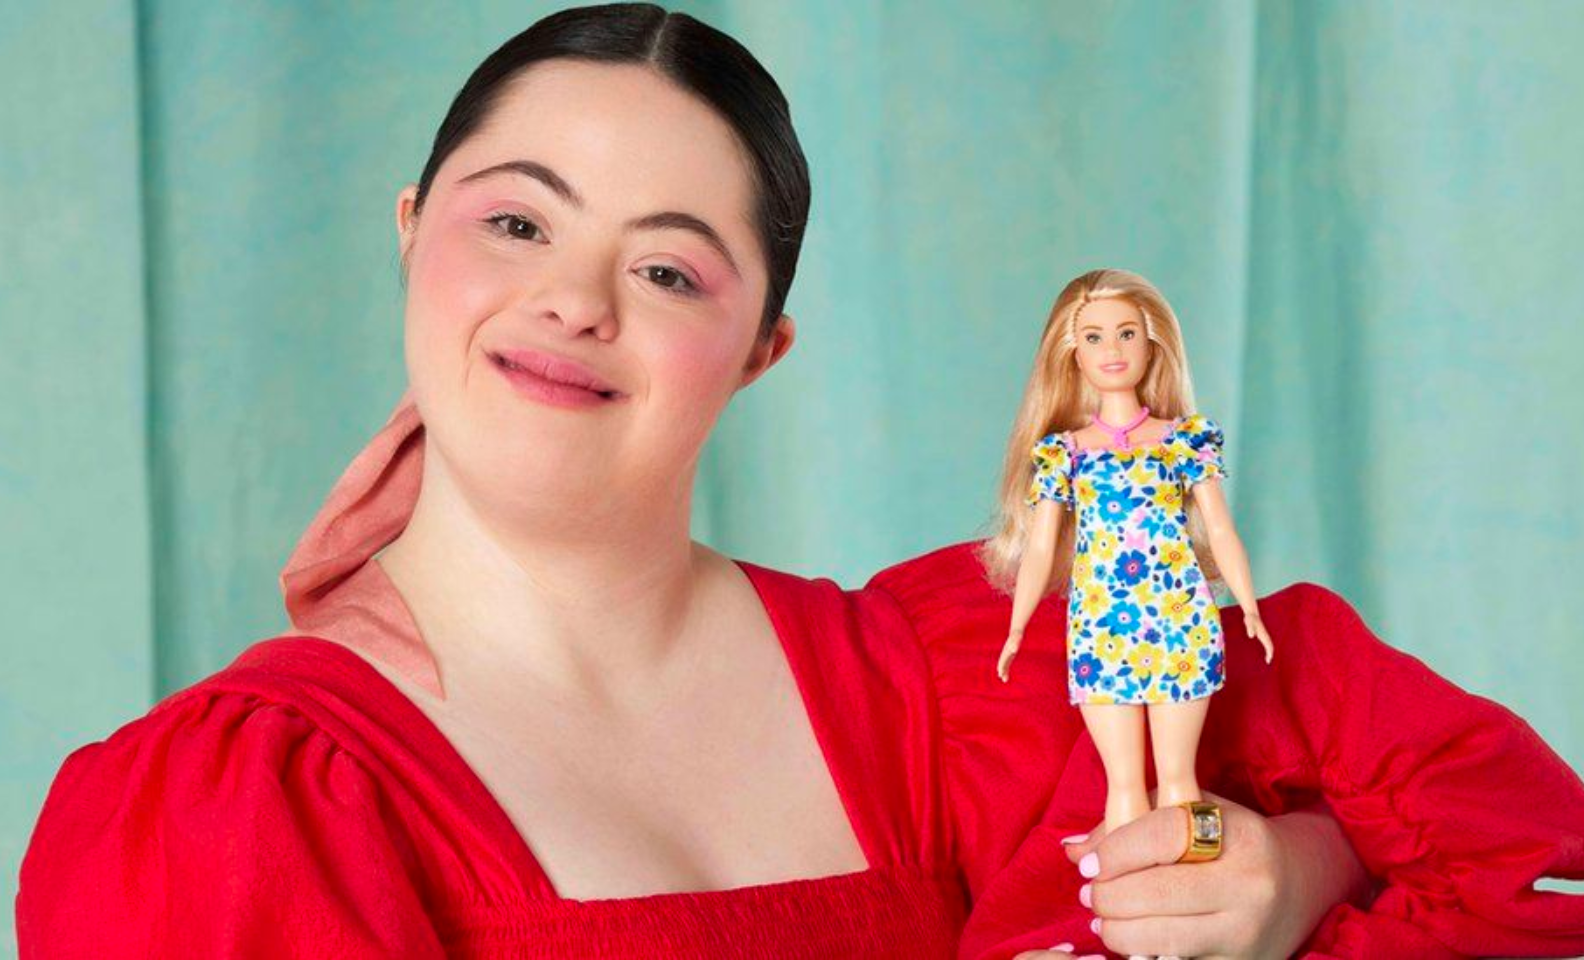 Barbie Doll with Down Syndrome – a massive step forward for the disability community.